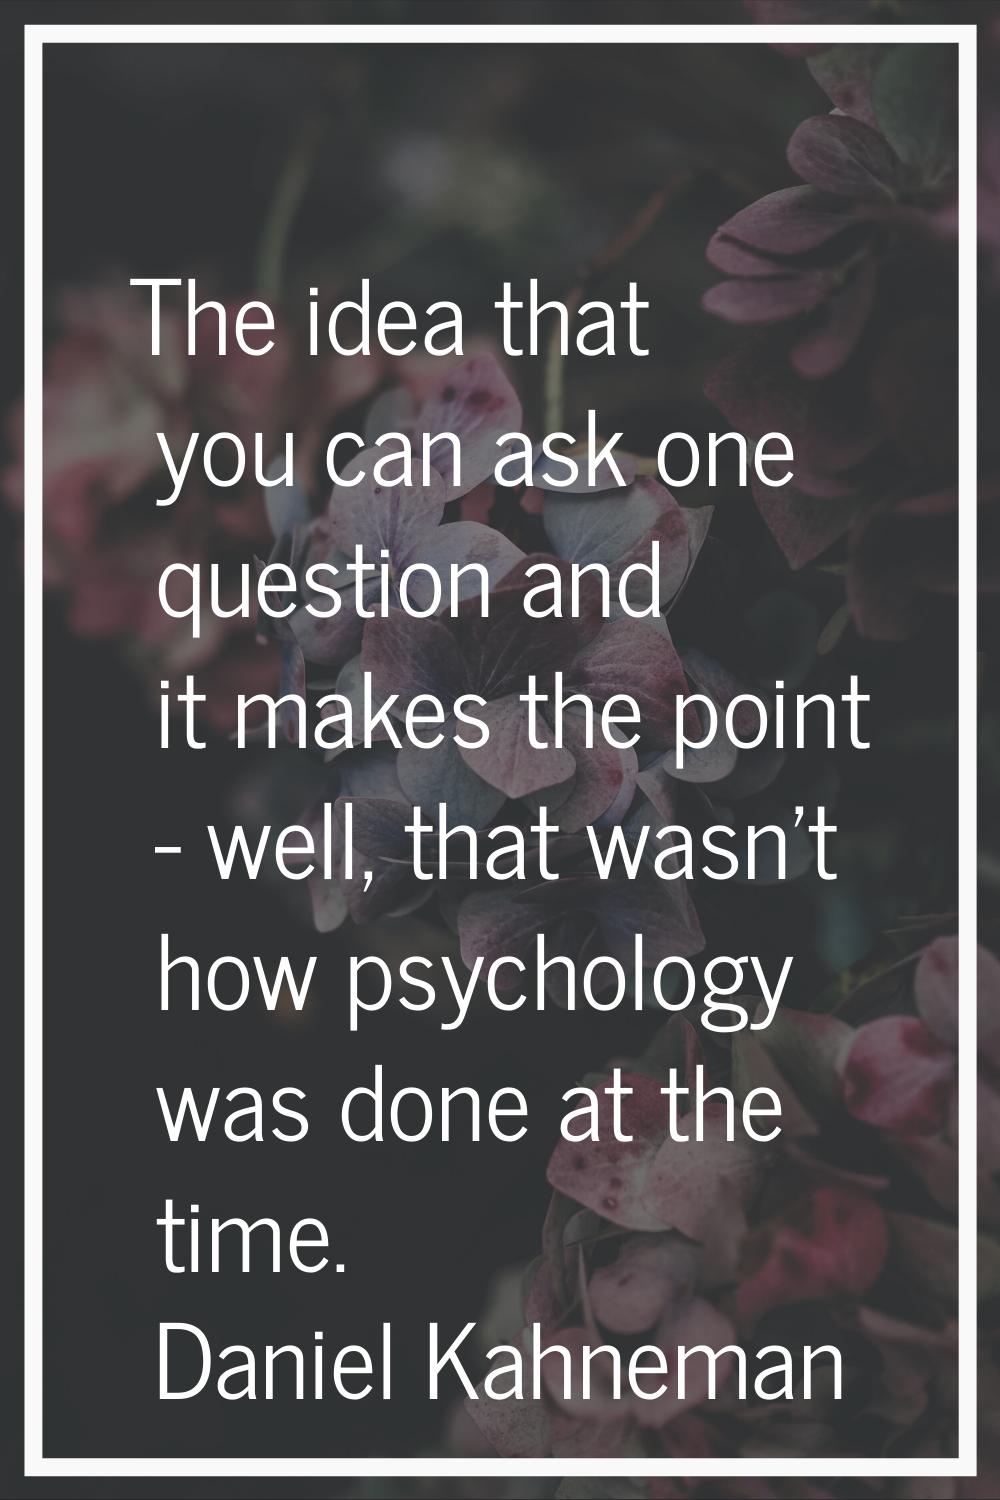 The idea that you can ask one question and it makes the point - well, that wasn't how psychology wa